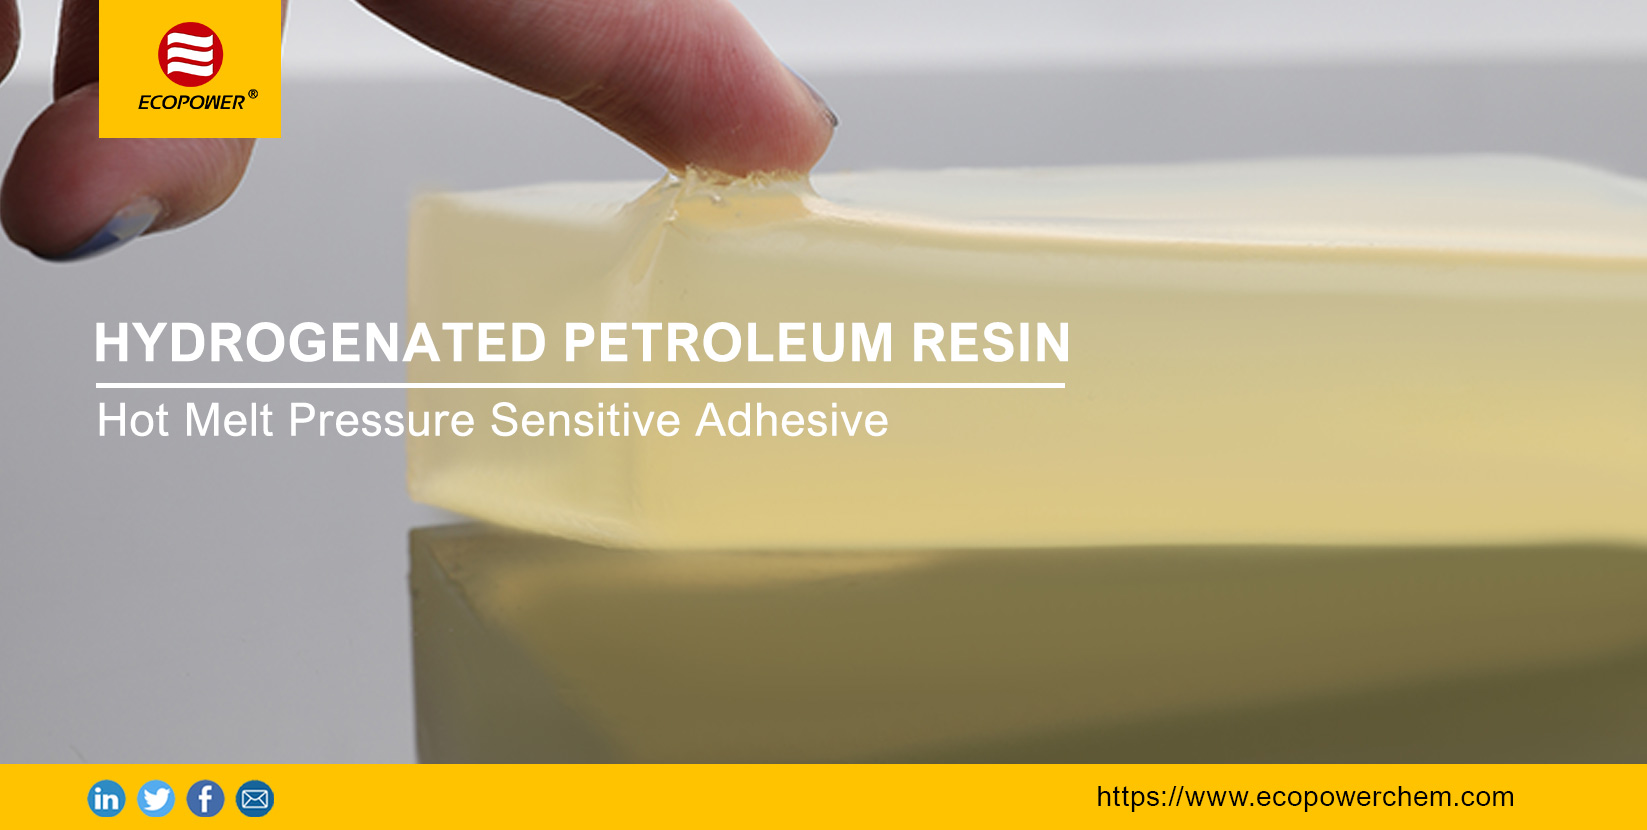 Versatile Applications of Hydrogenated Resins in Adhesive Formulations